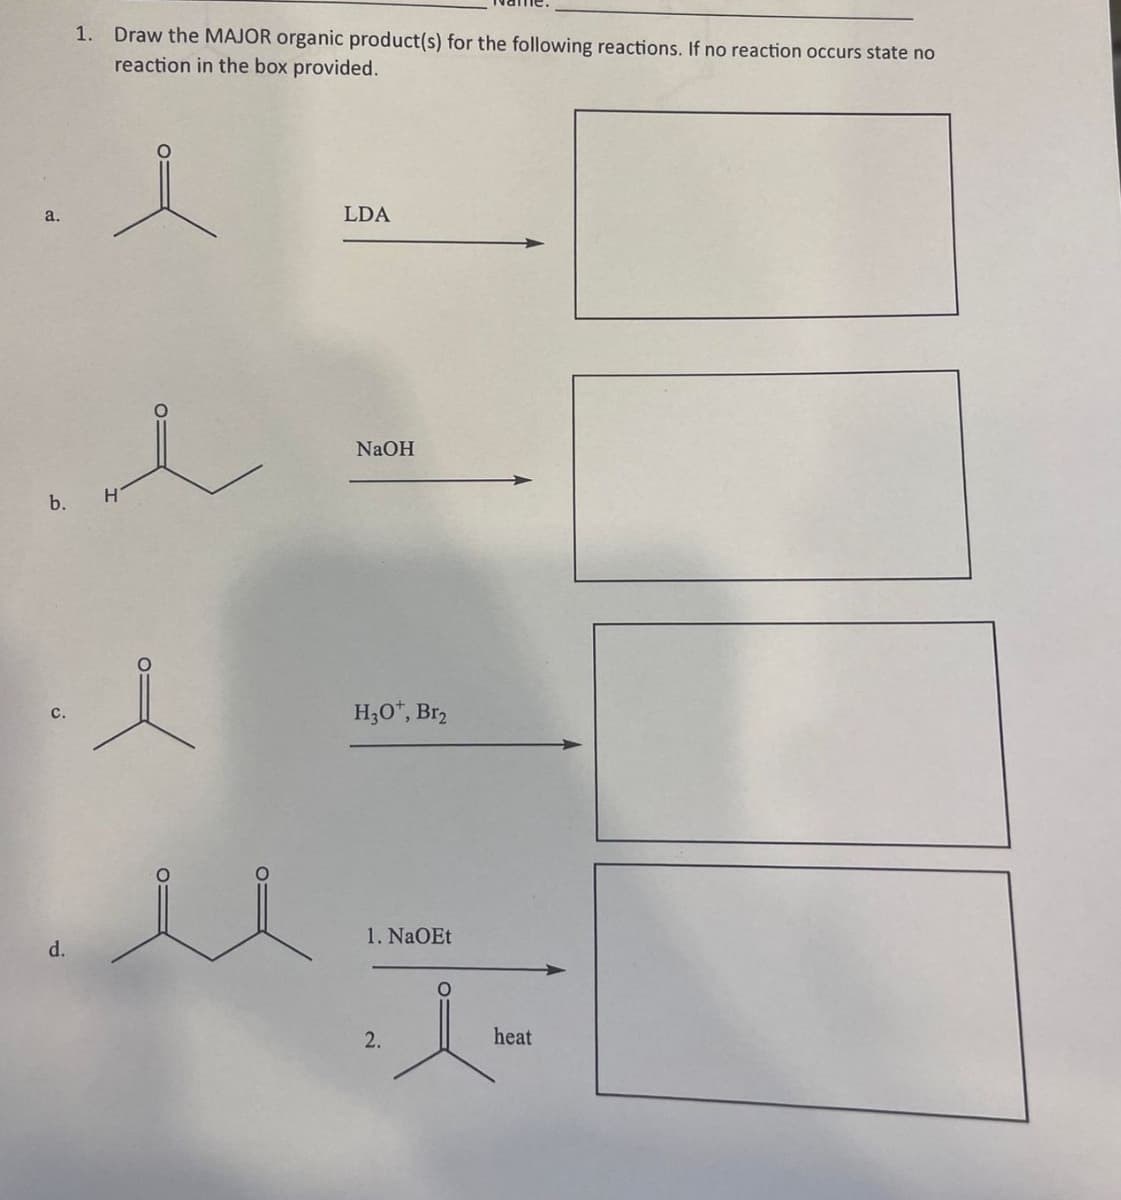 a.
1. Draw the MAJOR organic product(s) for the following reactions. If no reaction occurs state no
reaction in the box provided.
d.
e
b. H
l
LDA
NaOH
H3O+*, Br₂
1. NaOEt
JE
2.
heat